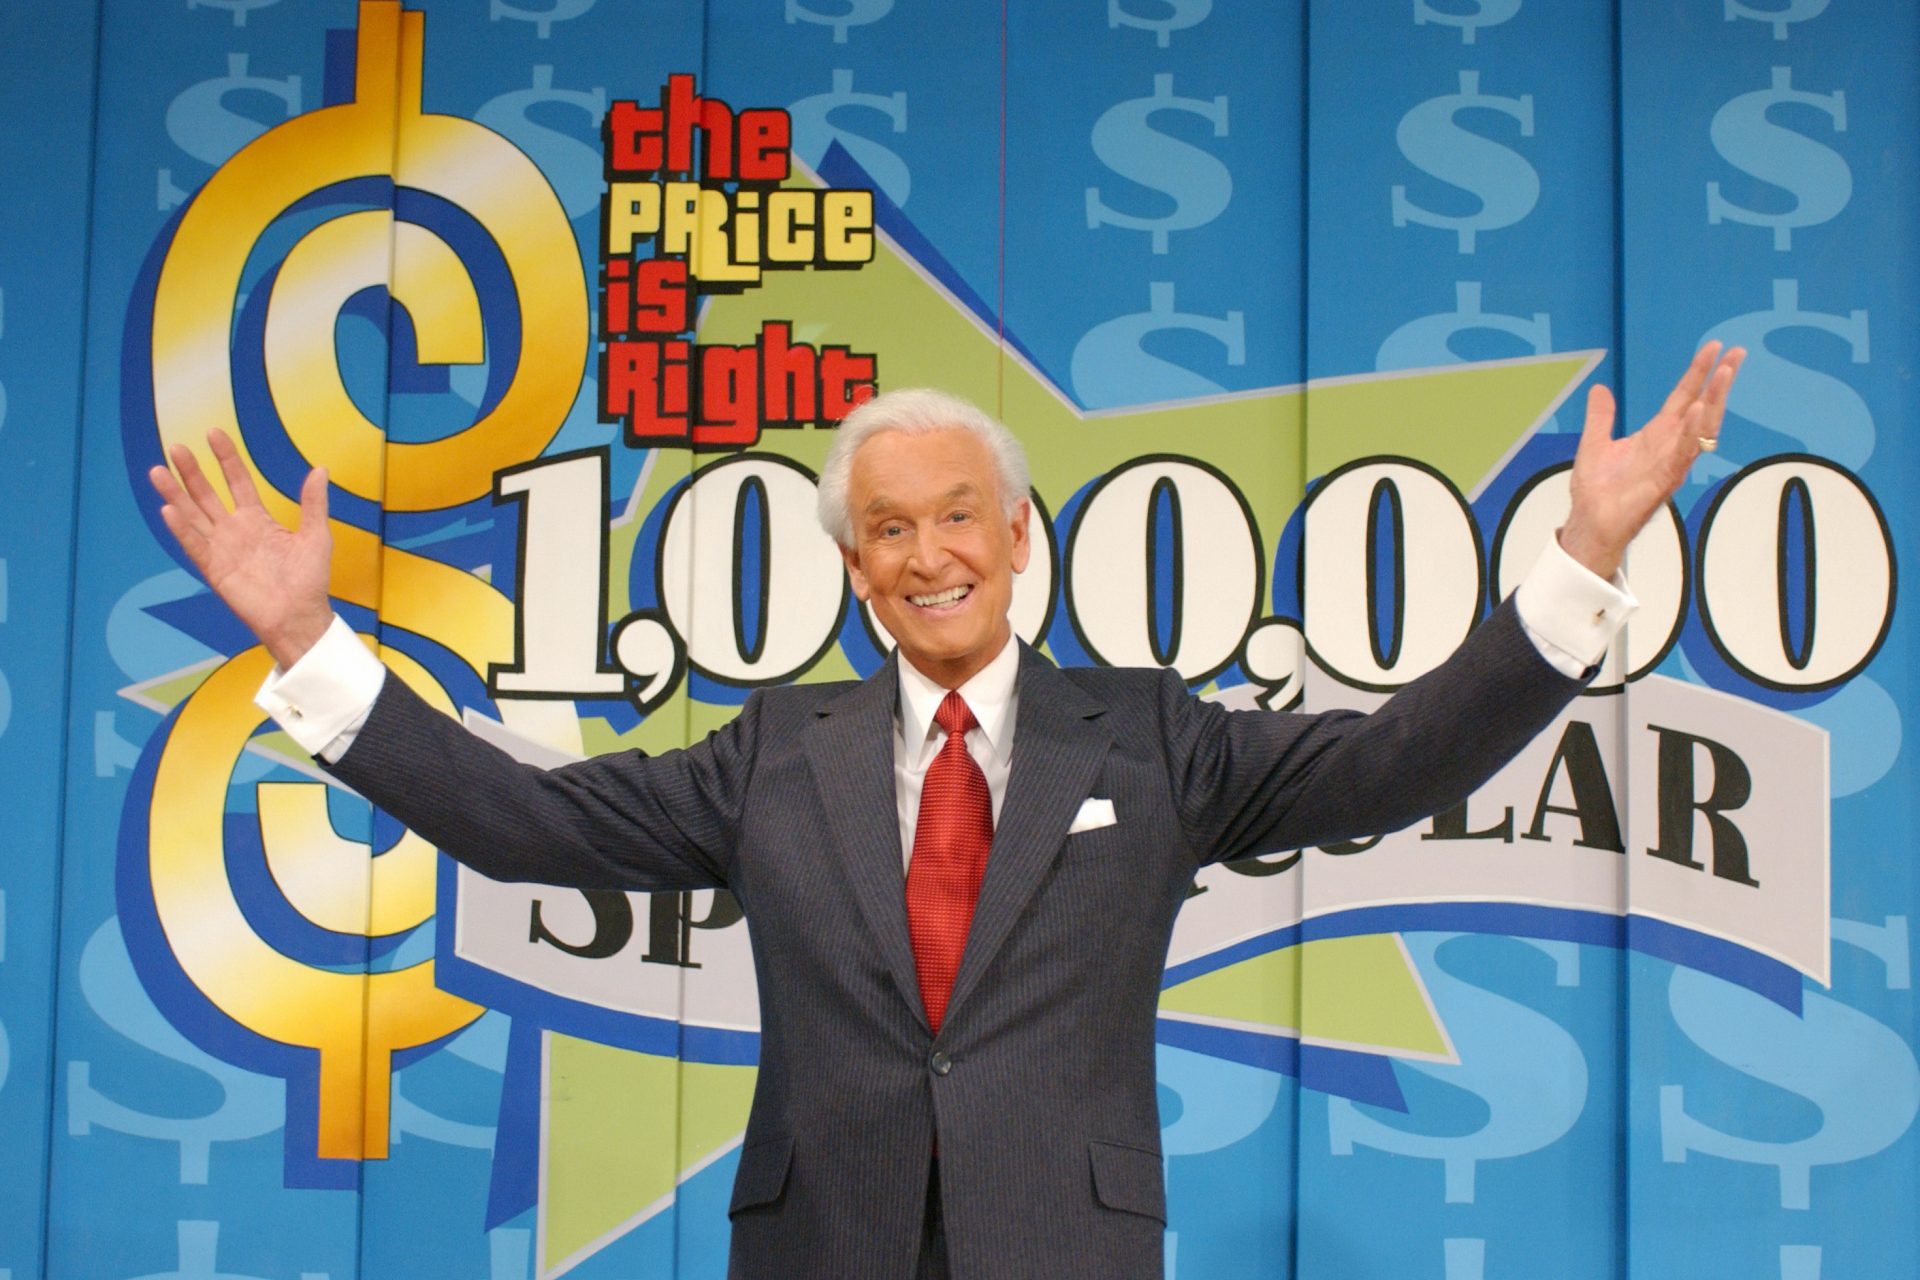 Bob Barker died on August 26th, at the age of 99